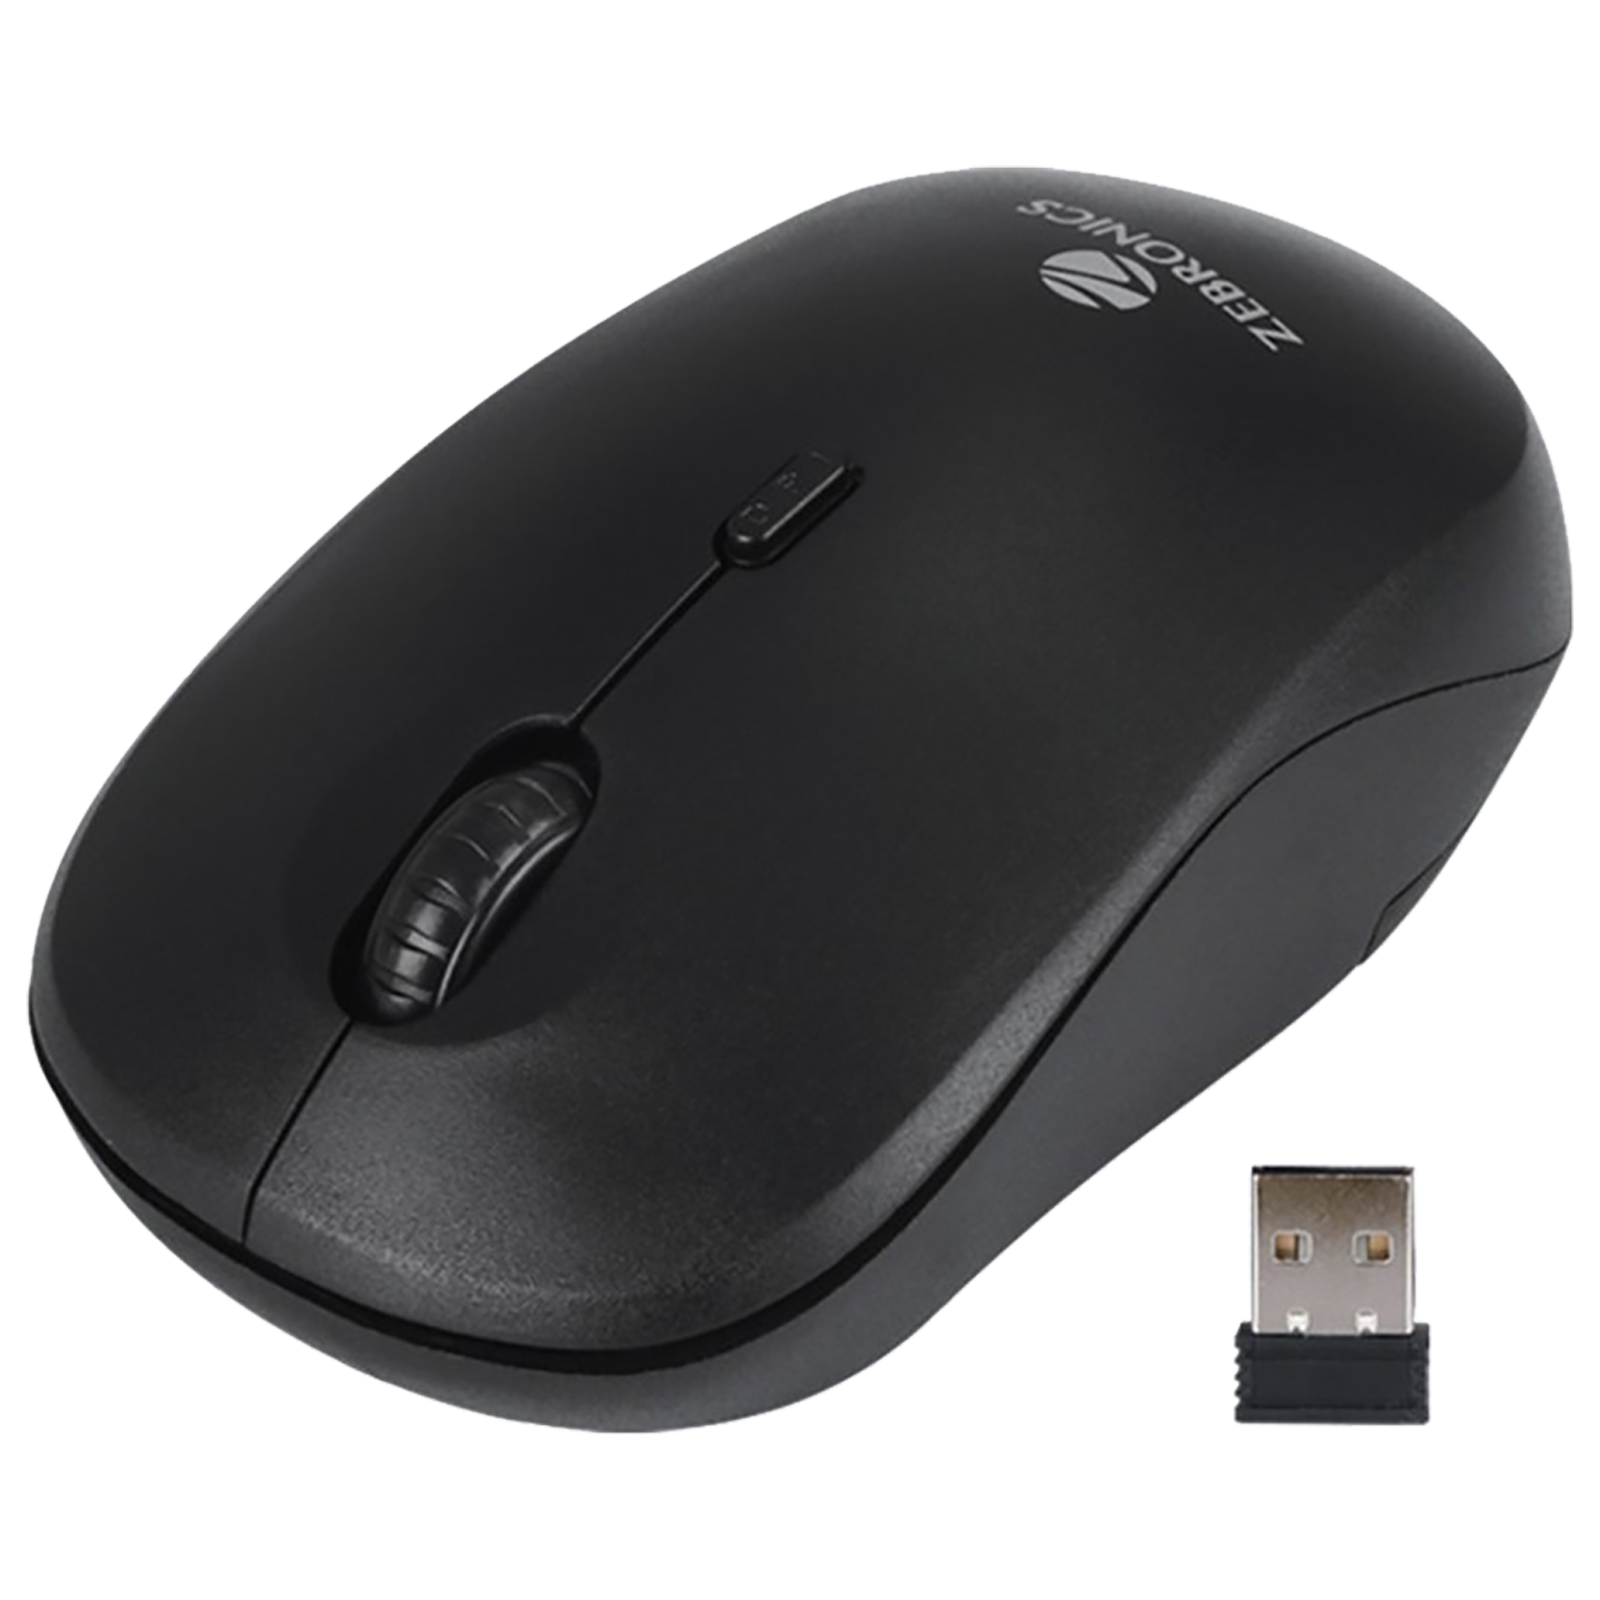 How choosing the Right Desktop Mouse for Your Needs